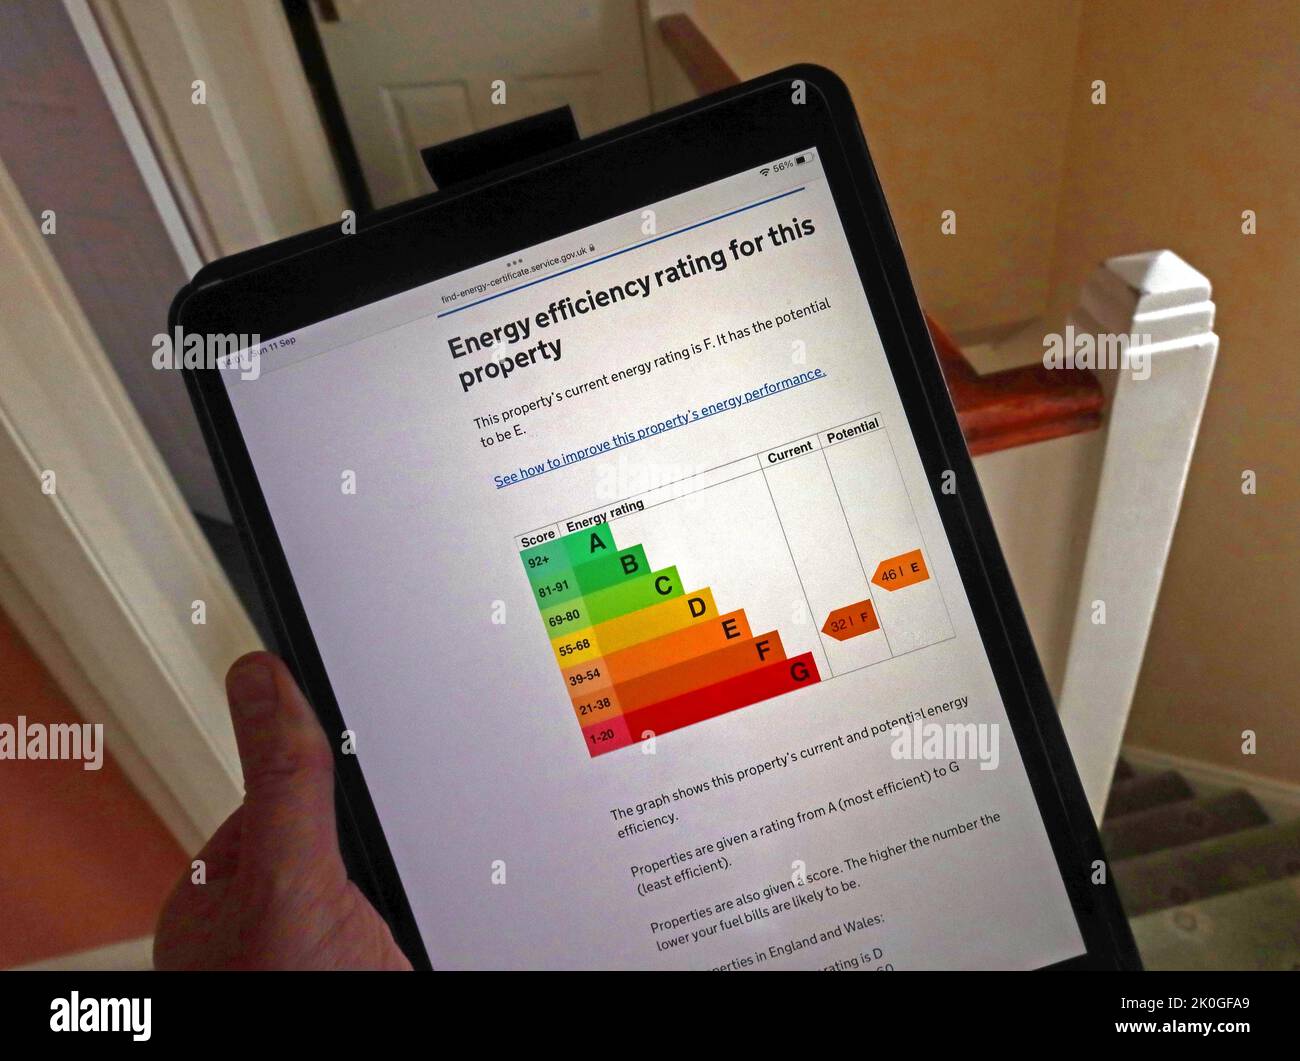 EPC energy Performance Certificate, for property badly insulated and with very poor efficiency rating of F able to be improved to E, on an iPad tablet Stock Photo